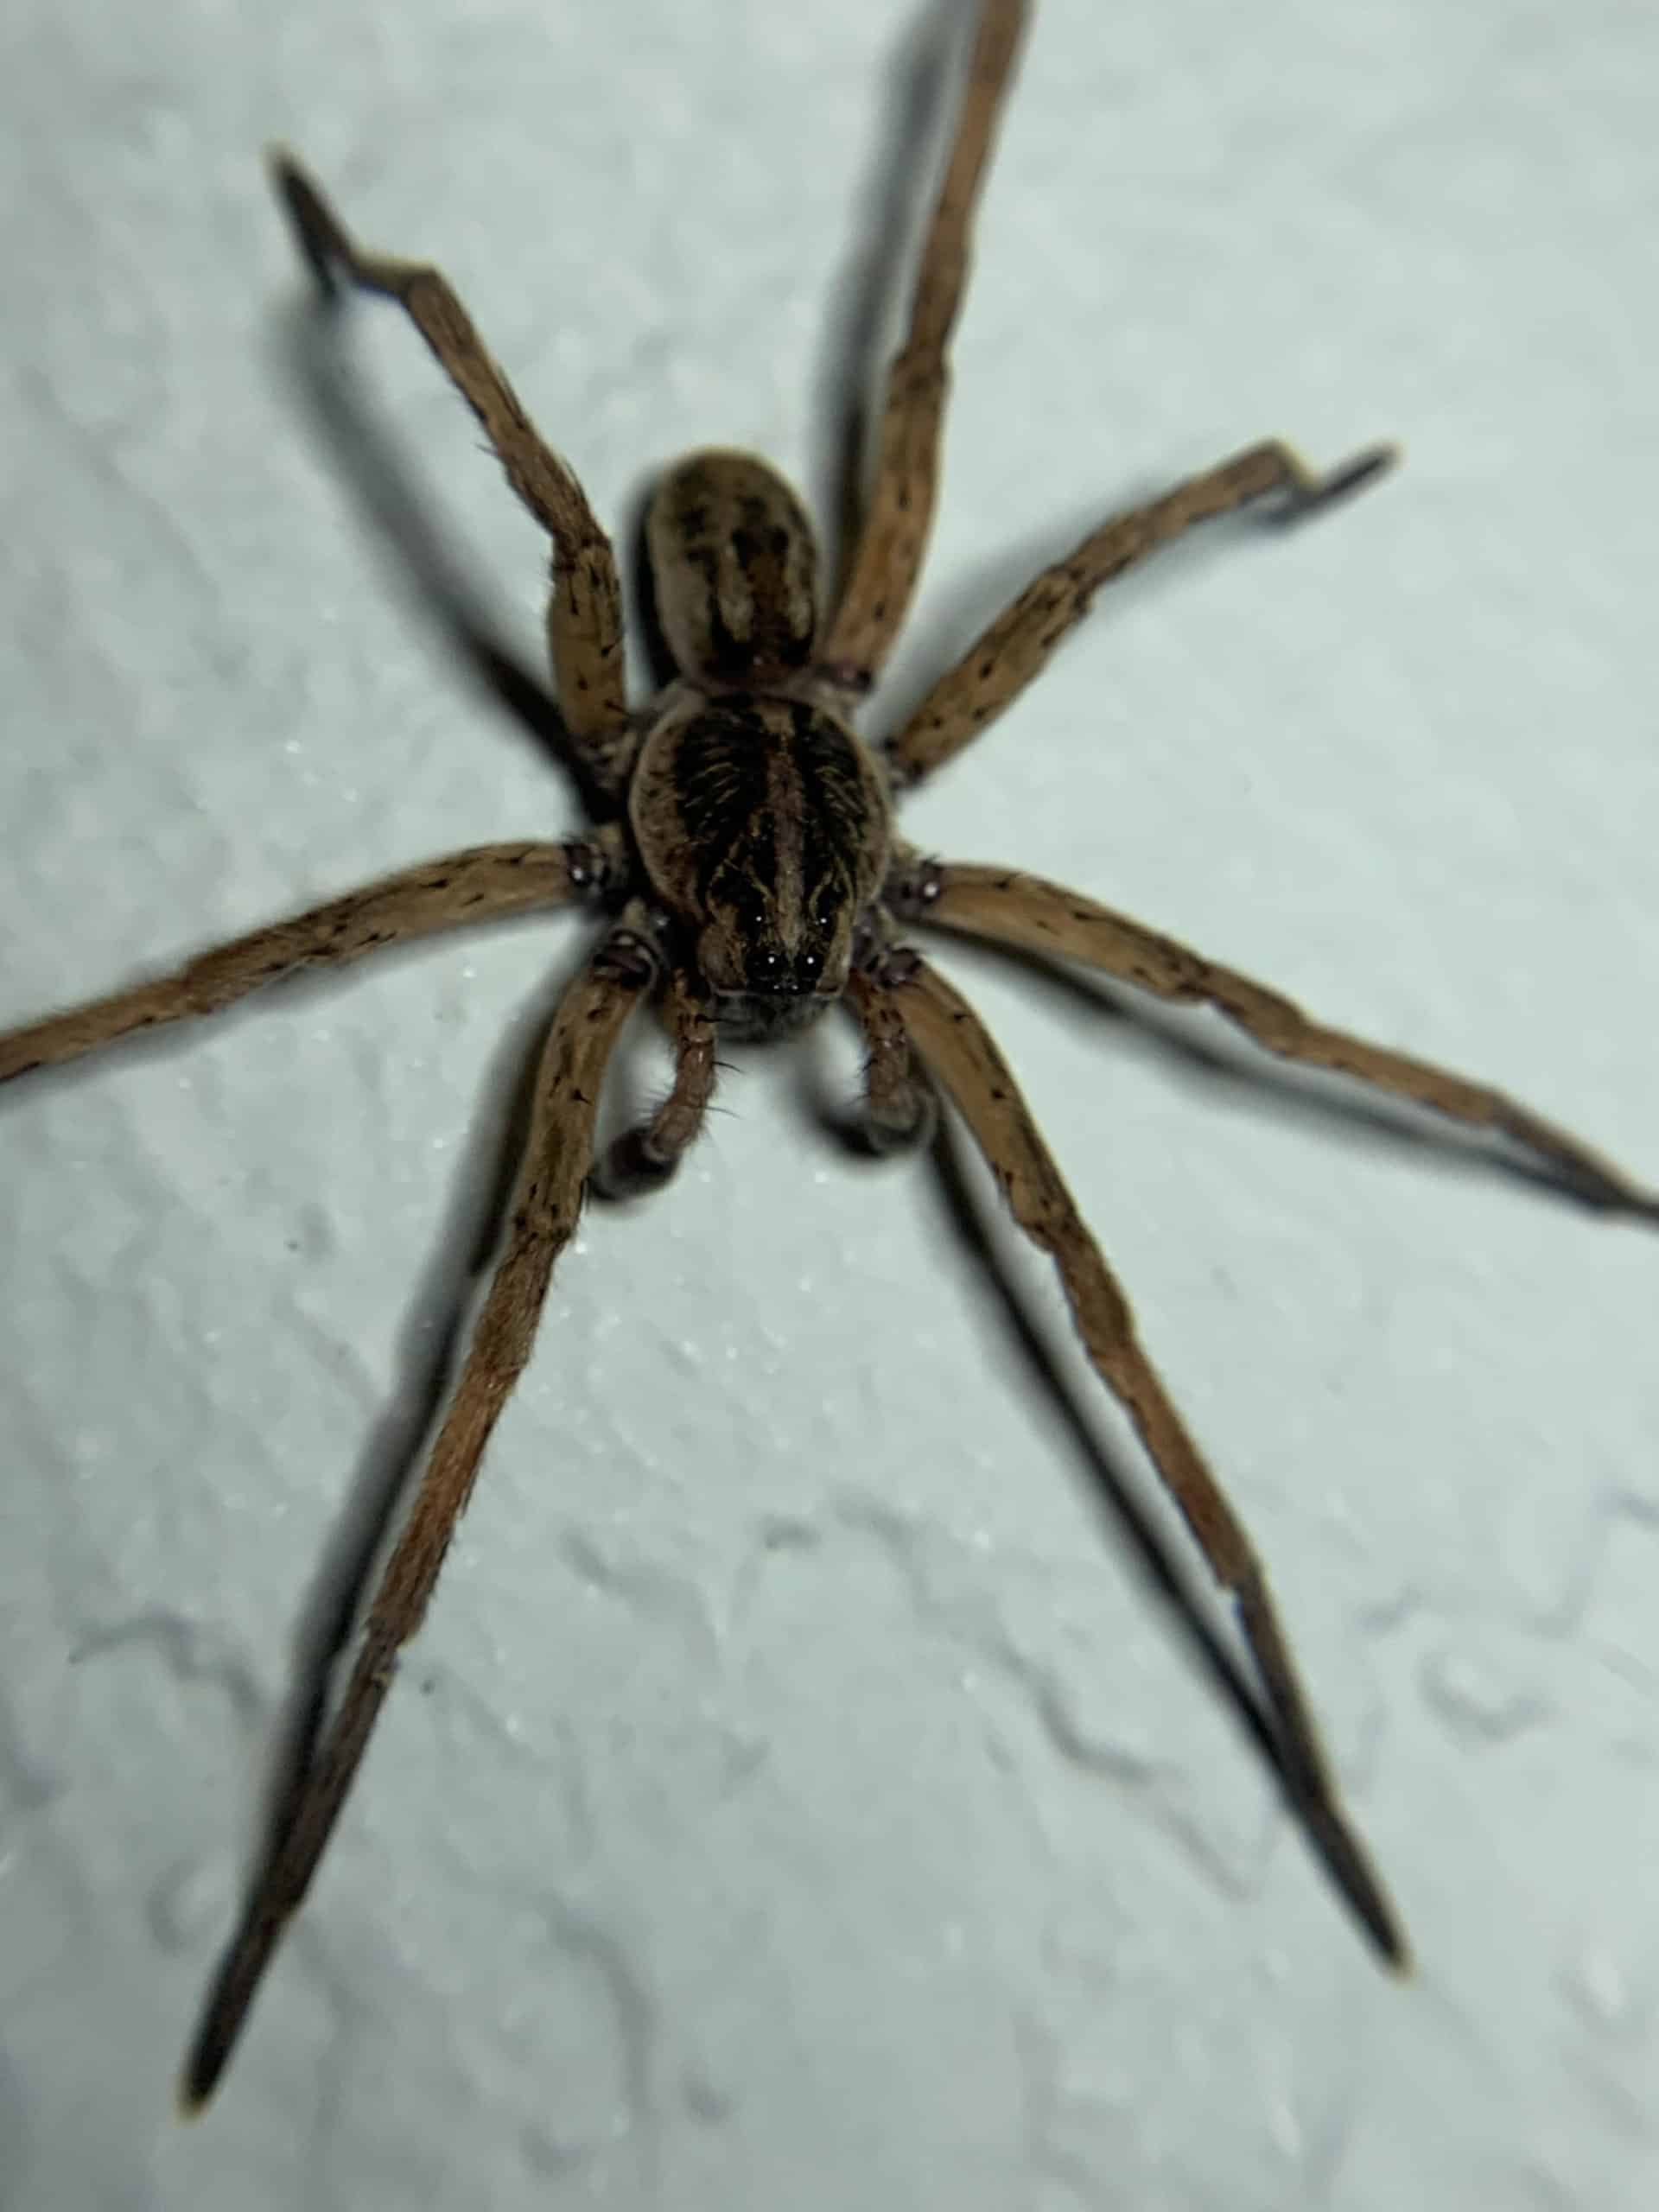 Florida Spiders in the Fall, Preventing Spiders